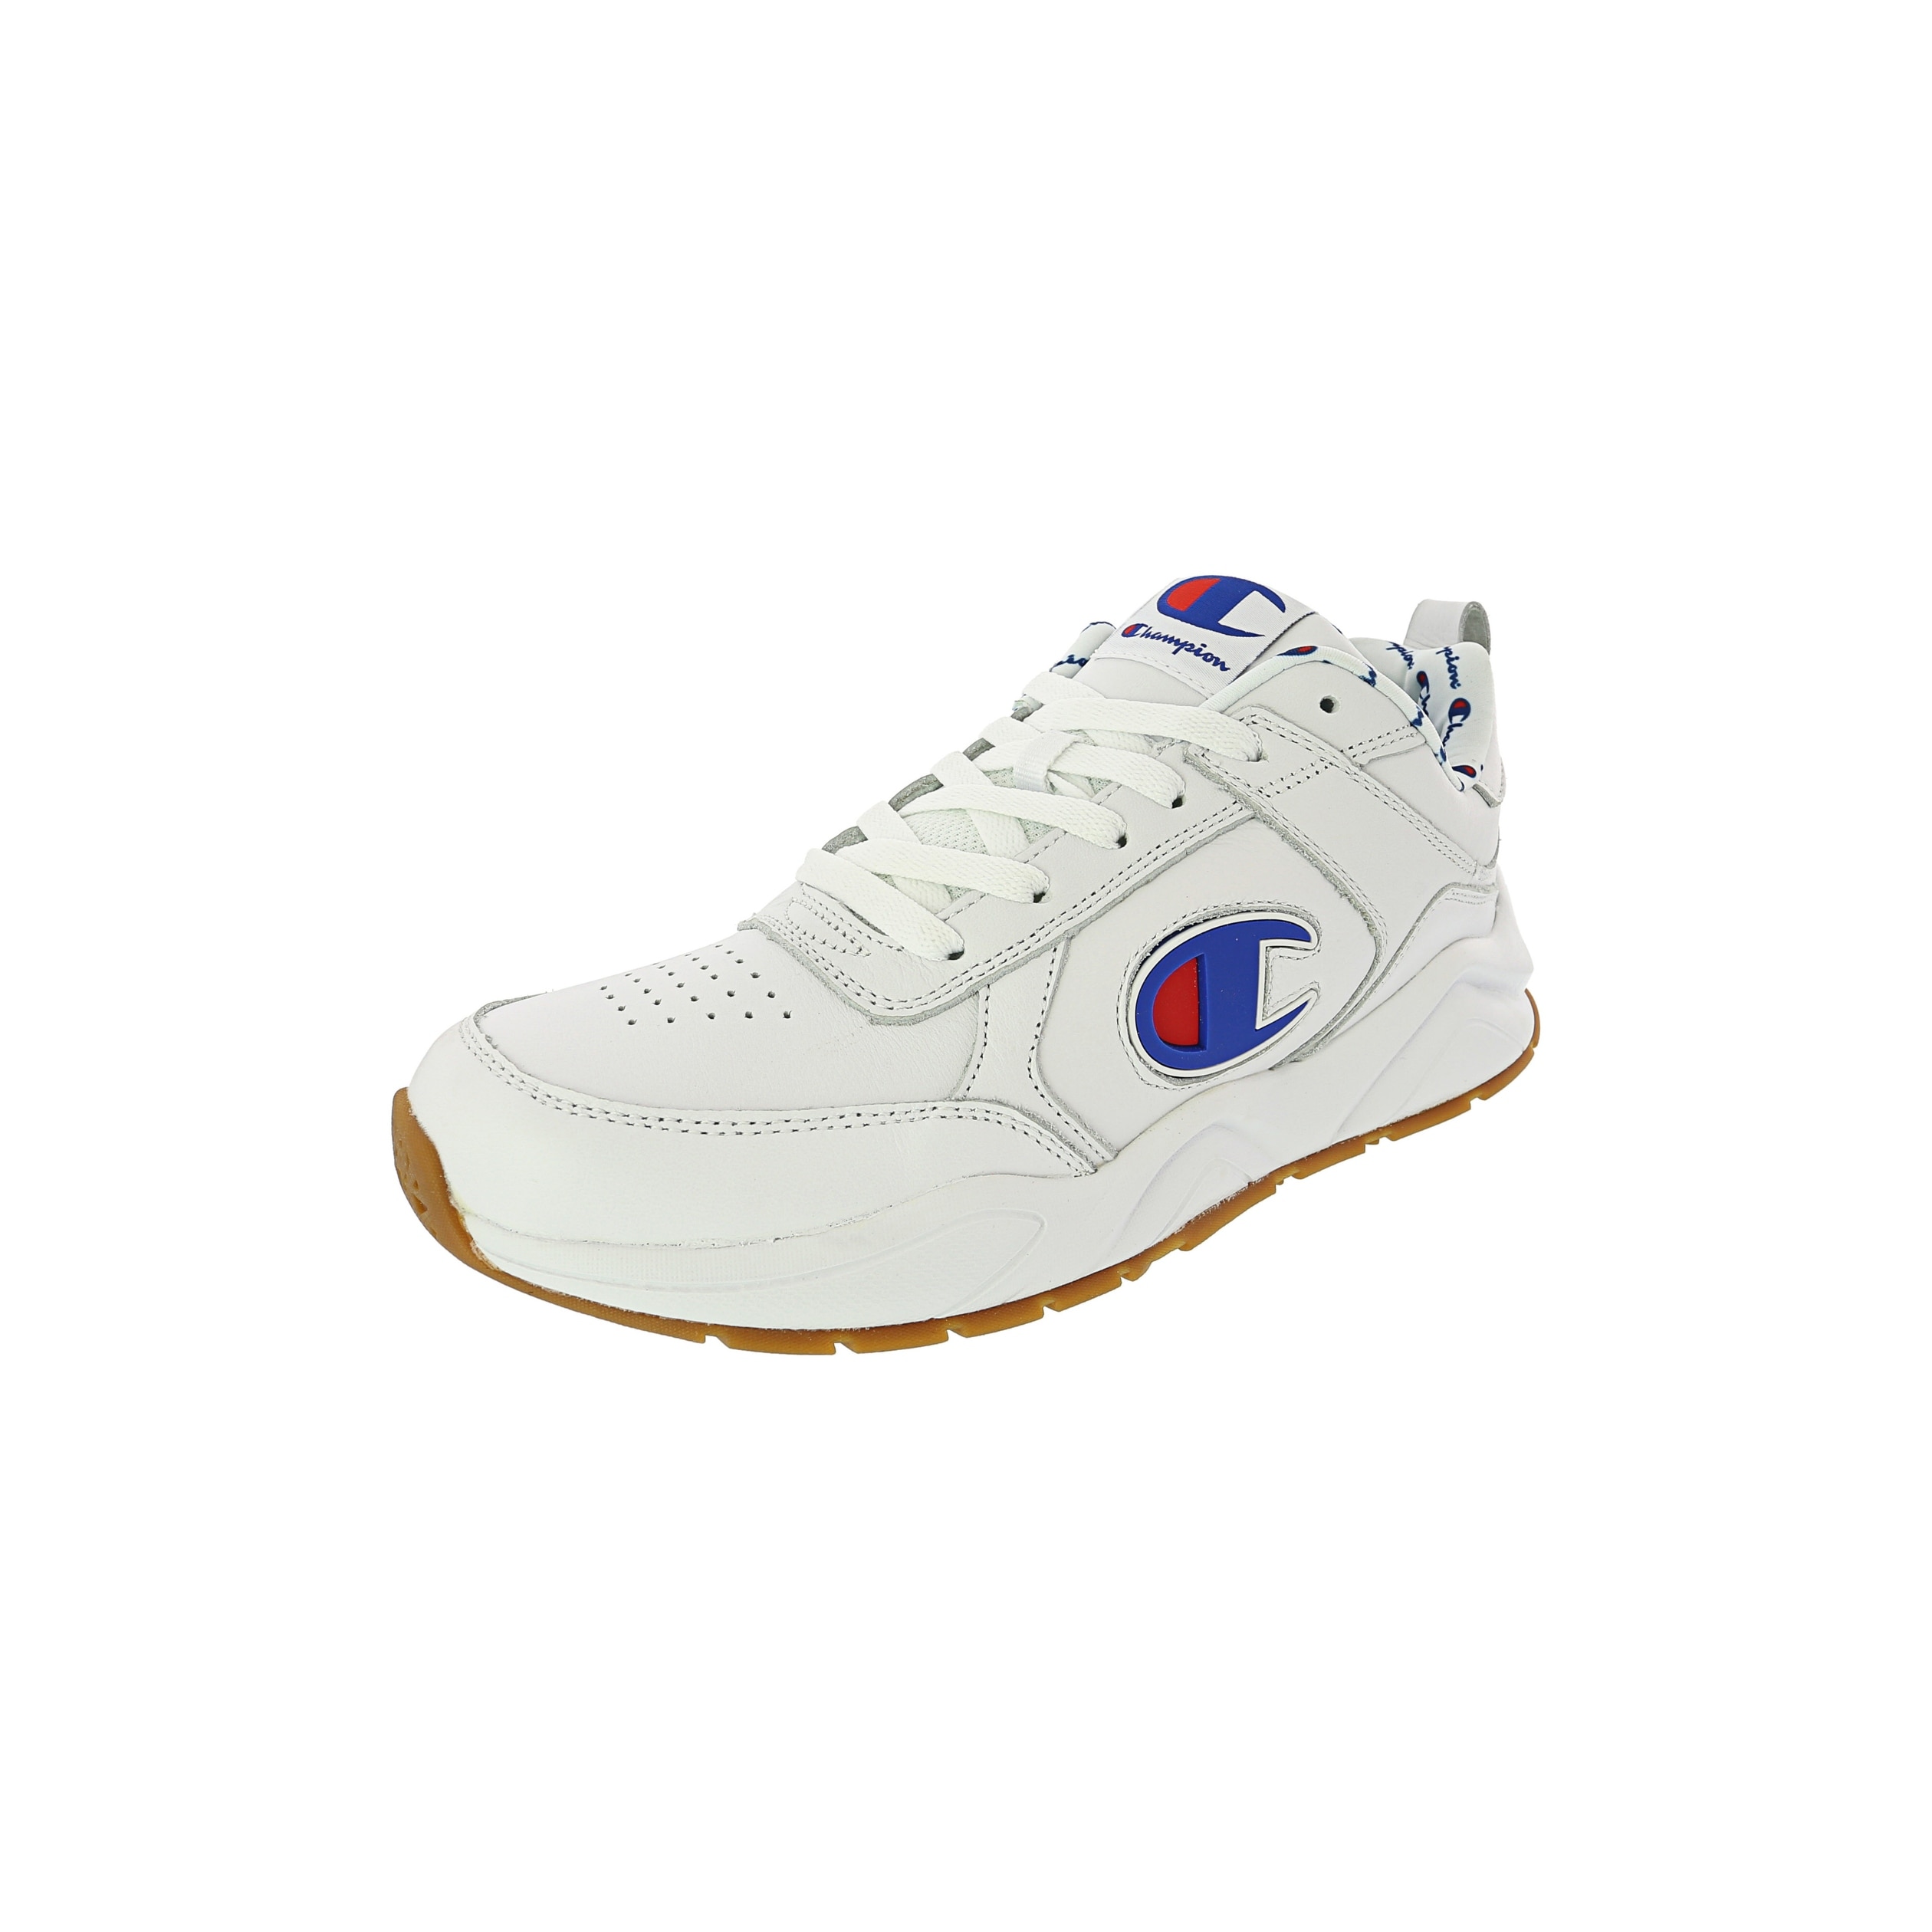 who sells champion sneakers